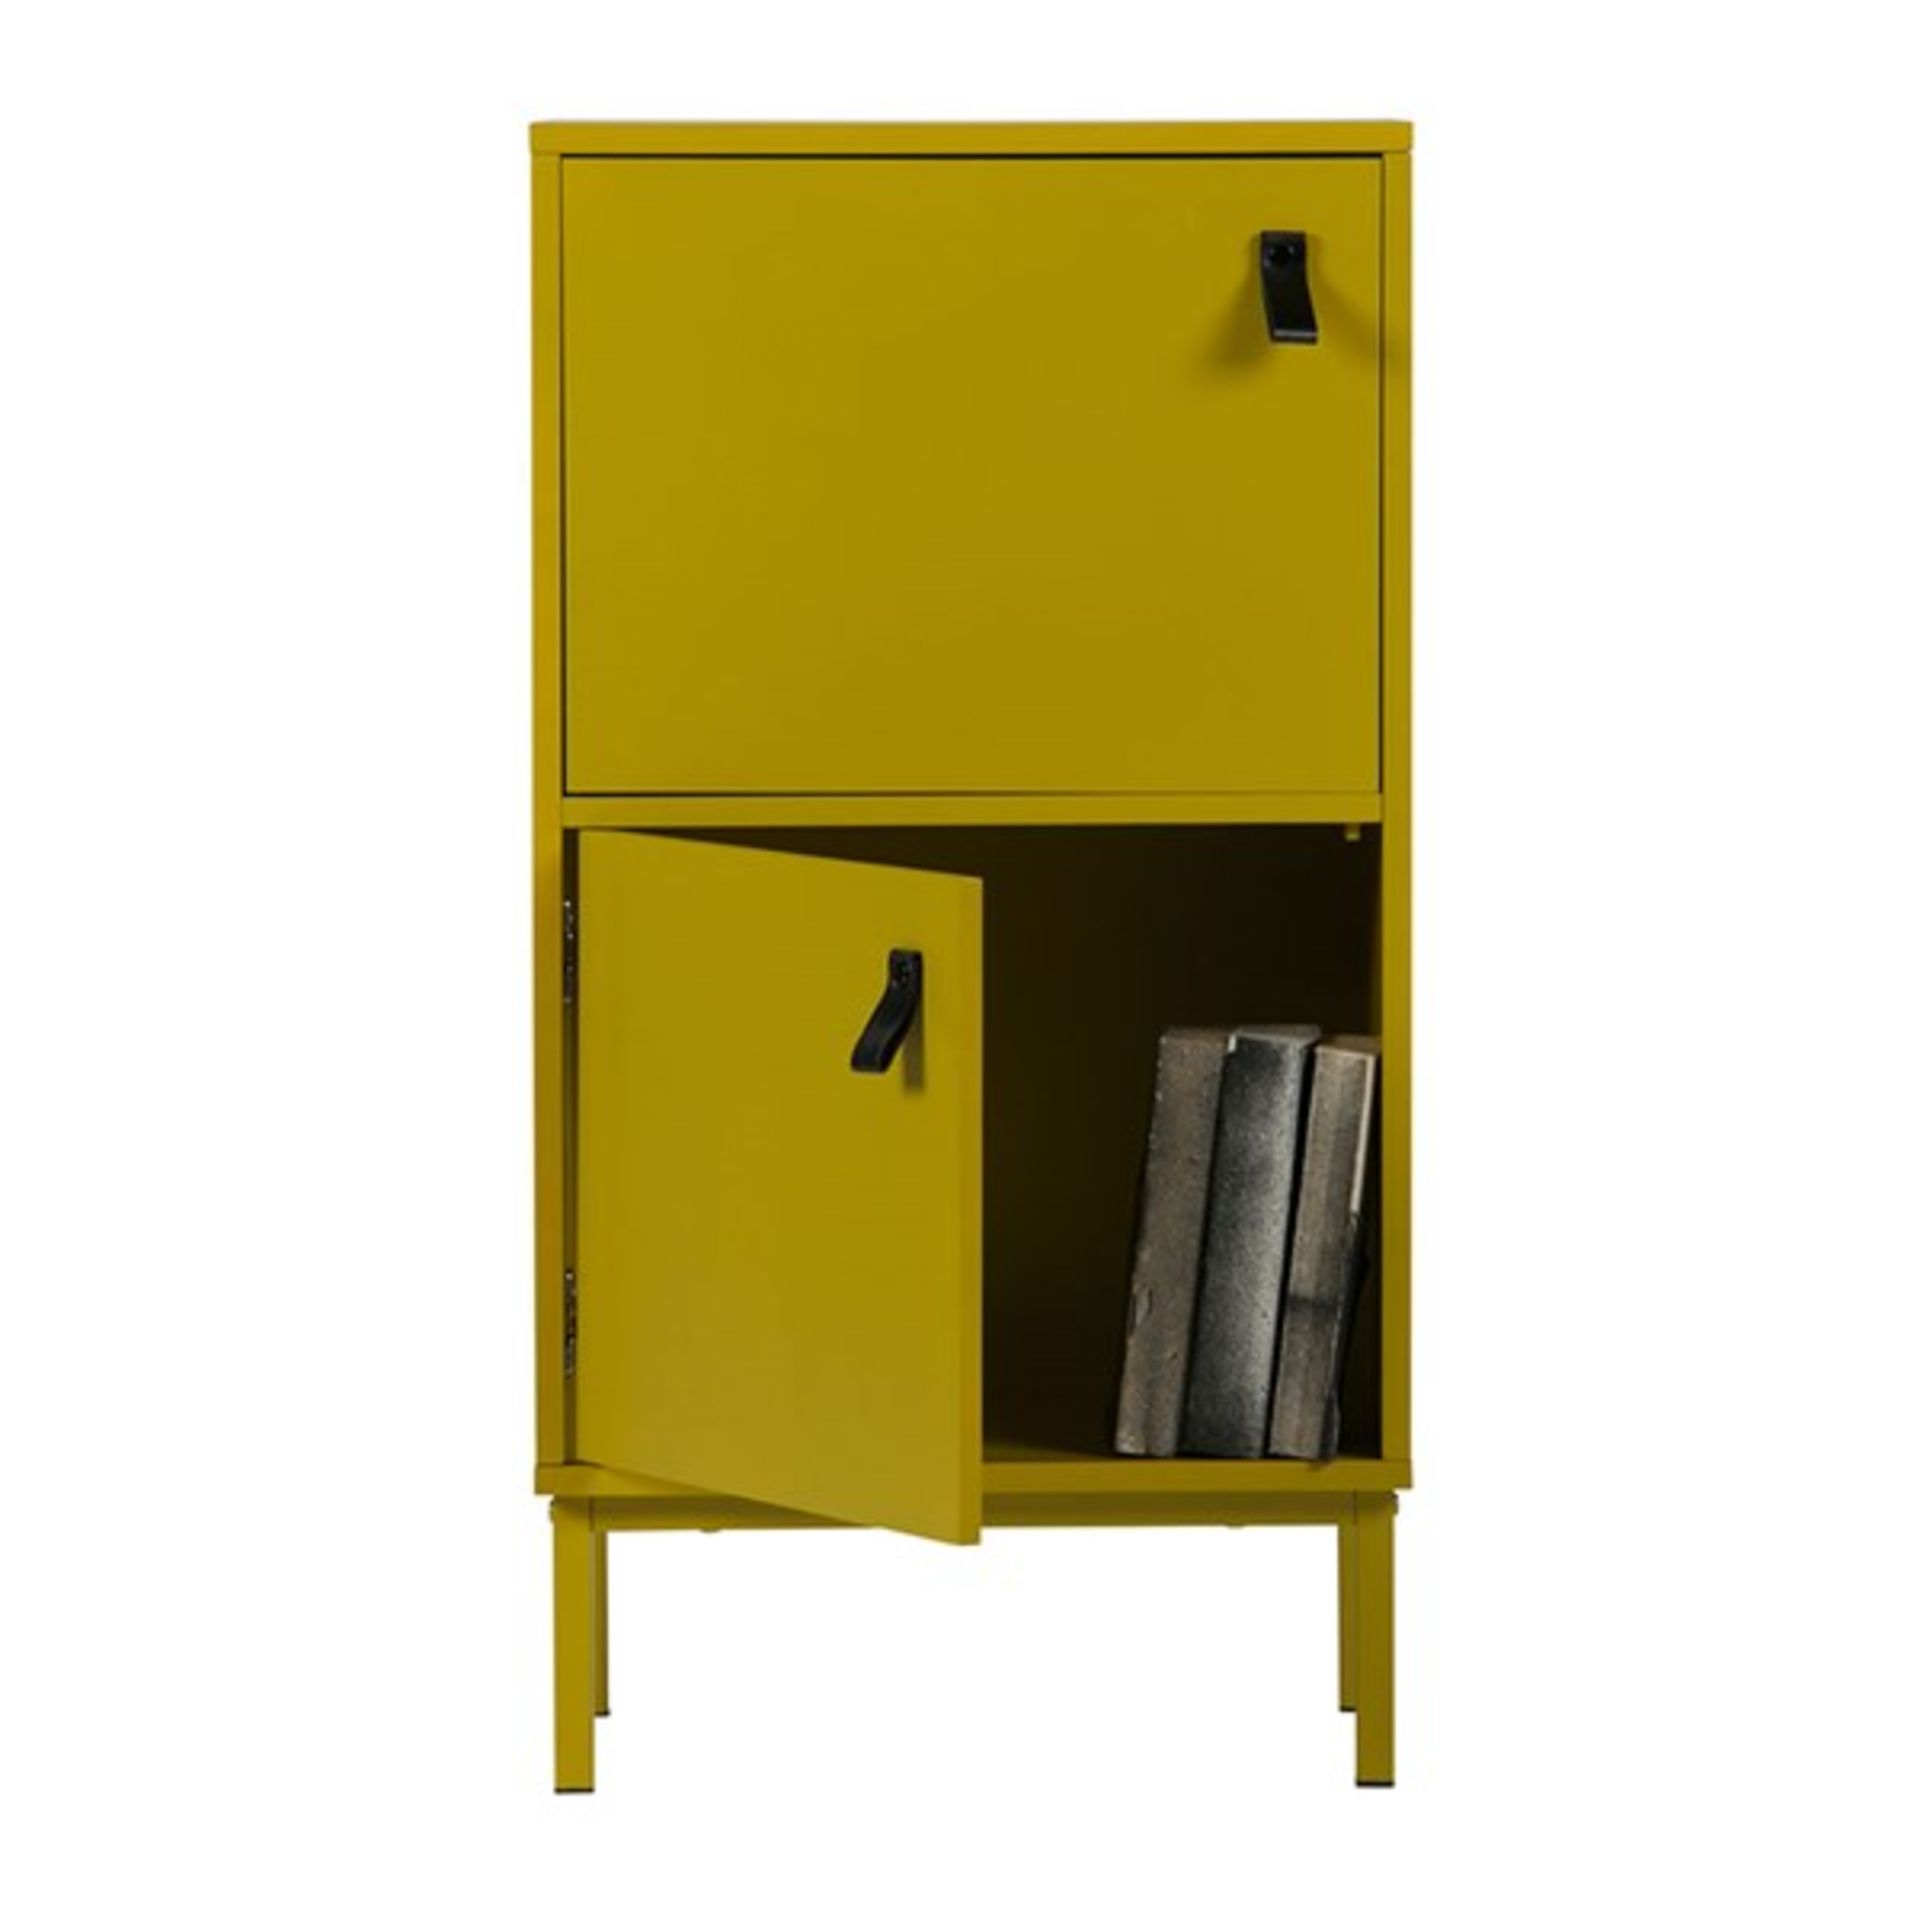 1 x WOOOD 'NICO' Contemporary 2-Door Cabinet In Mustard With Leather Handles - Brand New Boxed Stock - Image 3 of 3